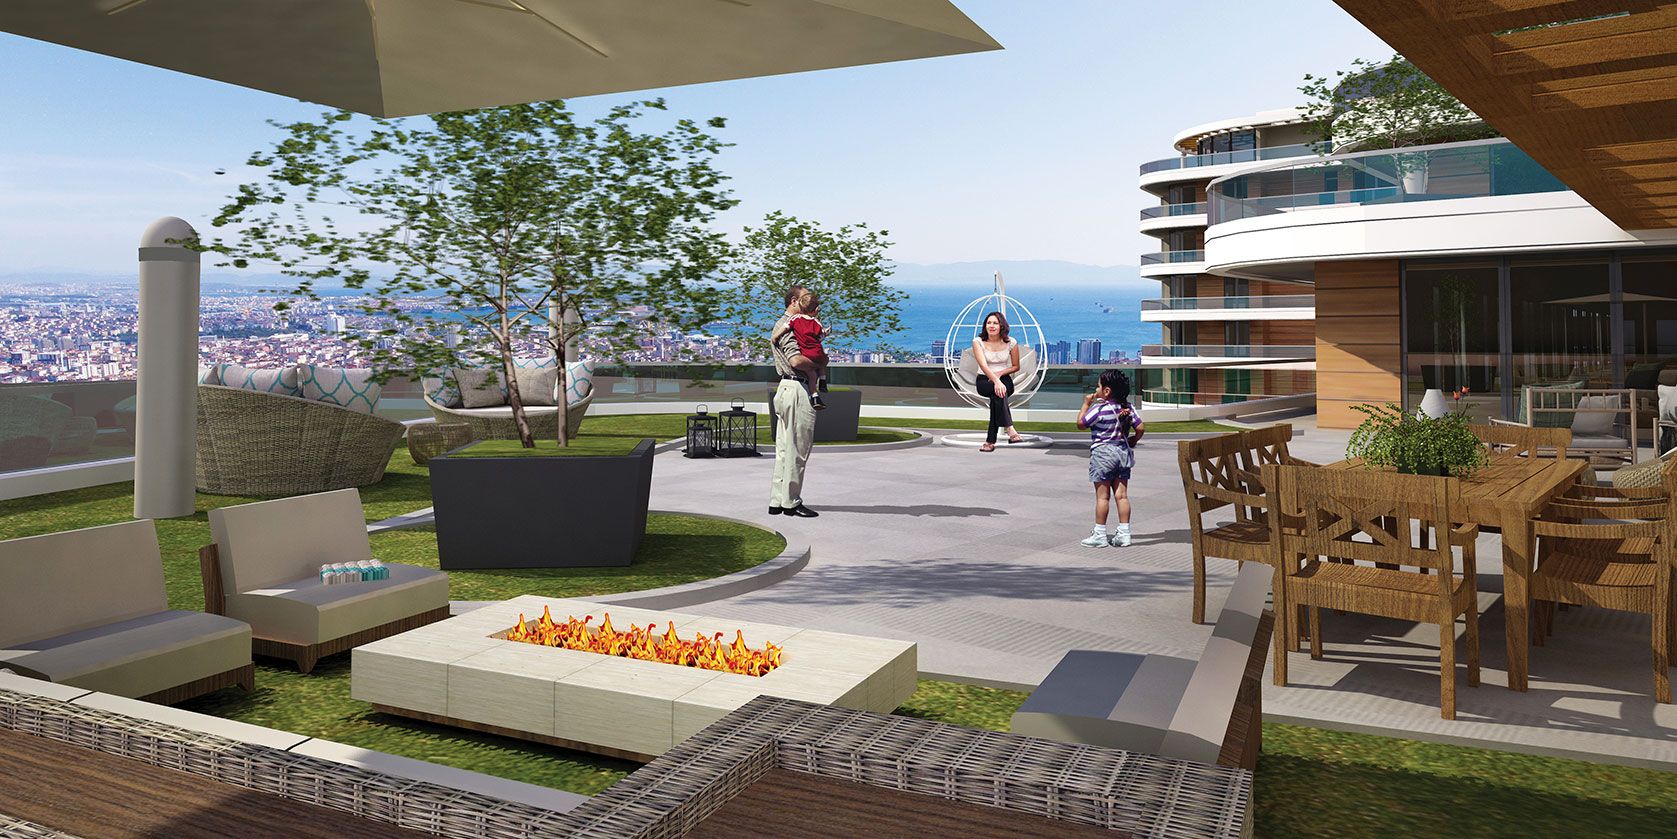 Apartments overlooking the sea and forest in İstanbul